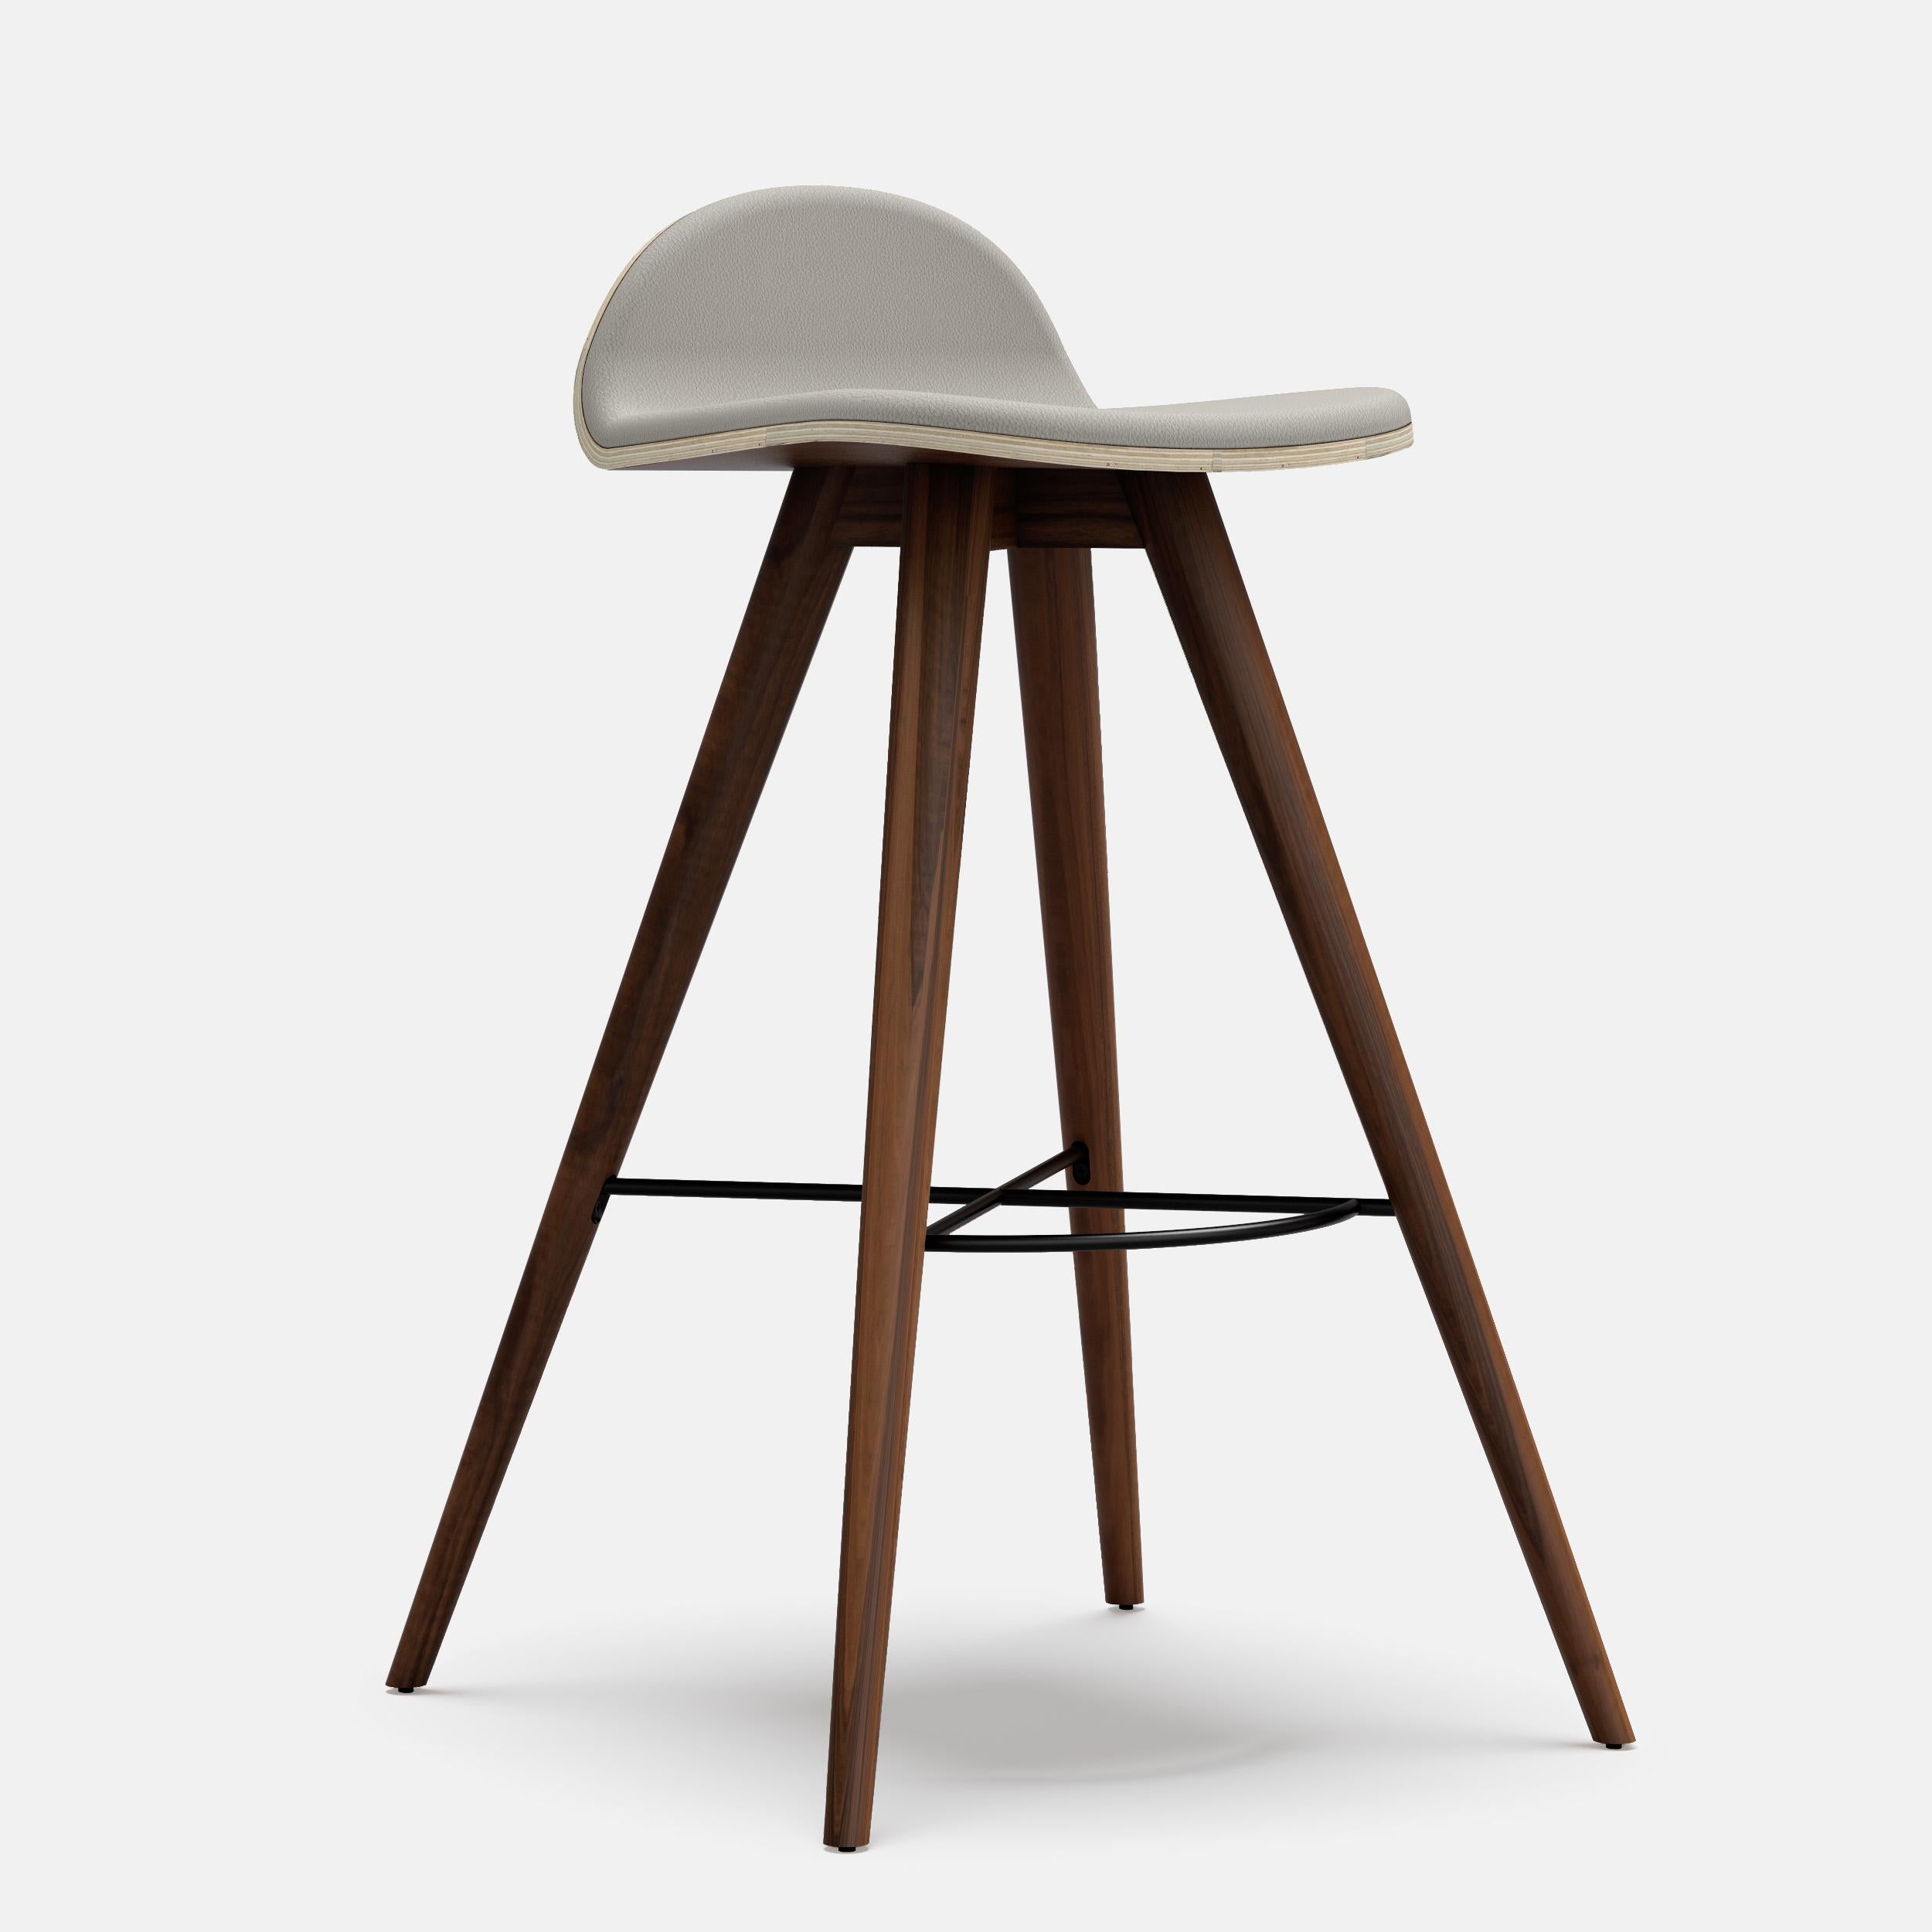 Walnut and fabric contemporary high stool by Alexandre Caldas
Dimensions: W 51 x D 46 x H 100 cm
Materials: American solid walnut and fabric

Structure also available in beech, ash, oak, mix wood
Seat also available in fabric, leather,